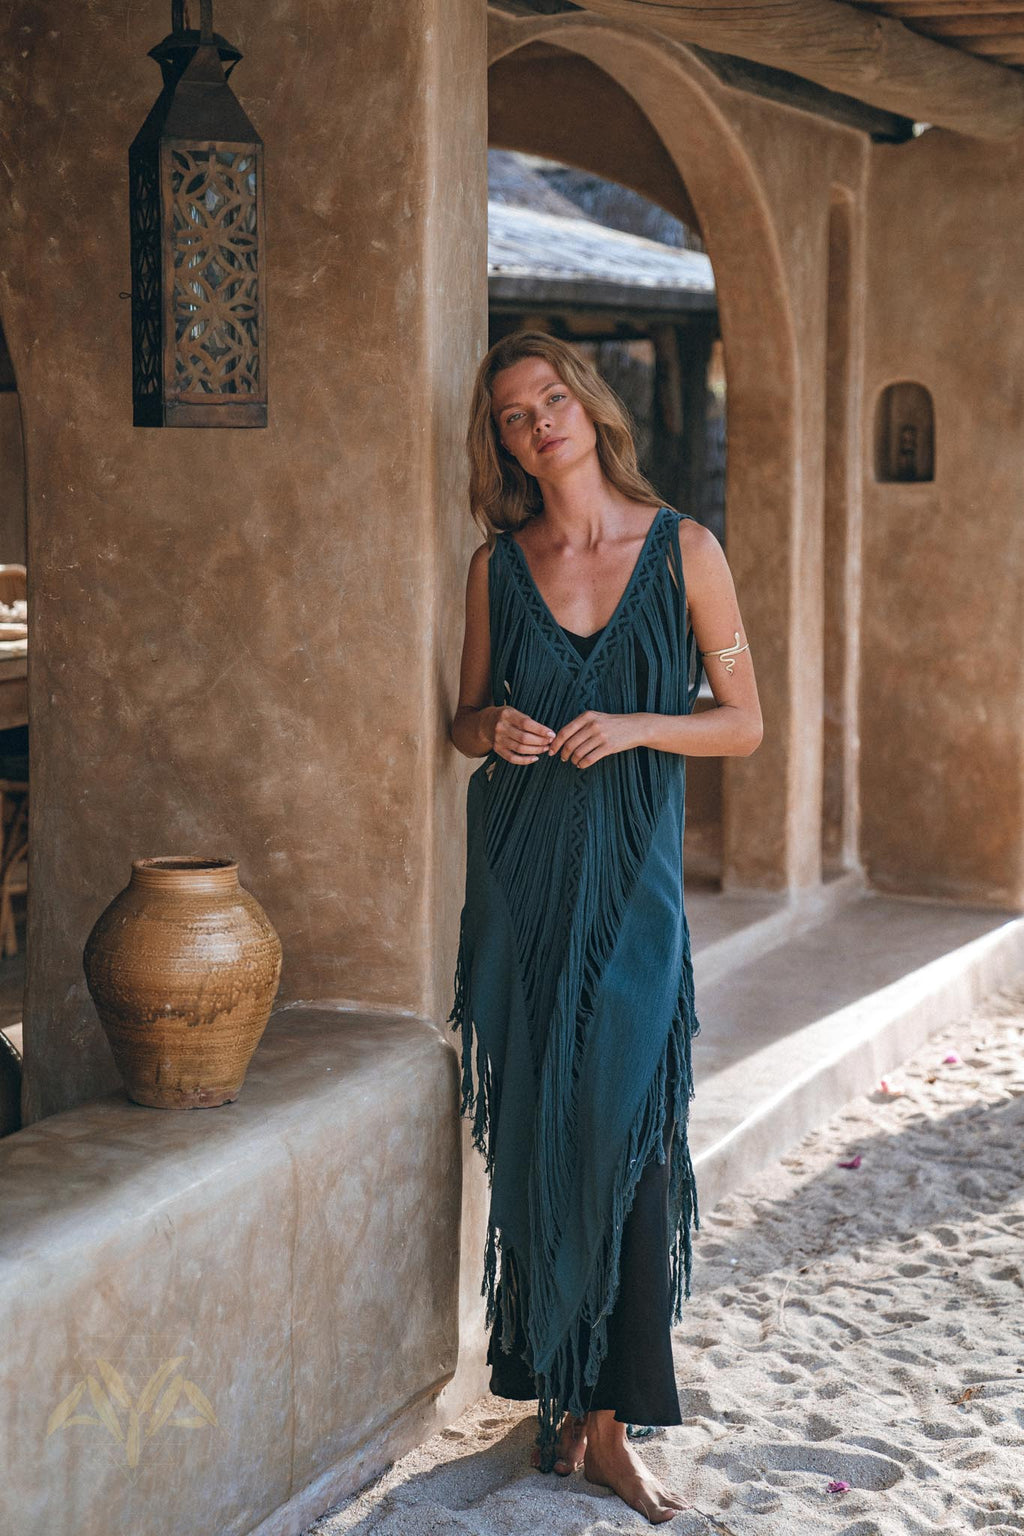 Make a statement in this Navy Blue long maxi dress with tribal raw cotton cover-up to spice up your look.